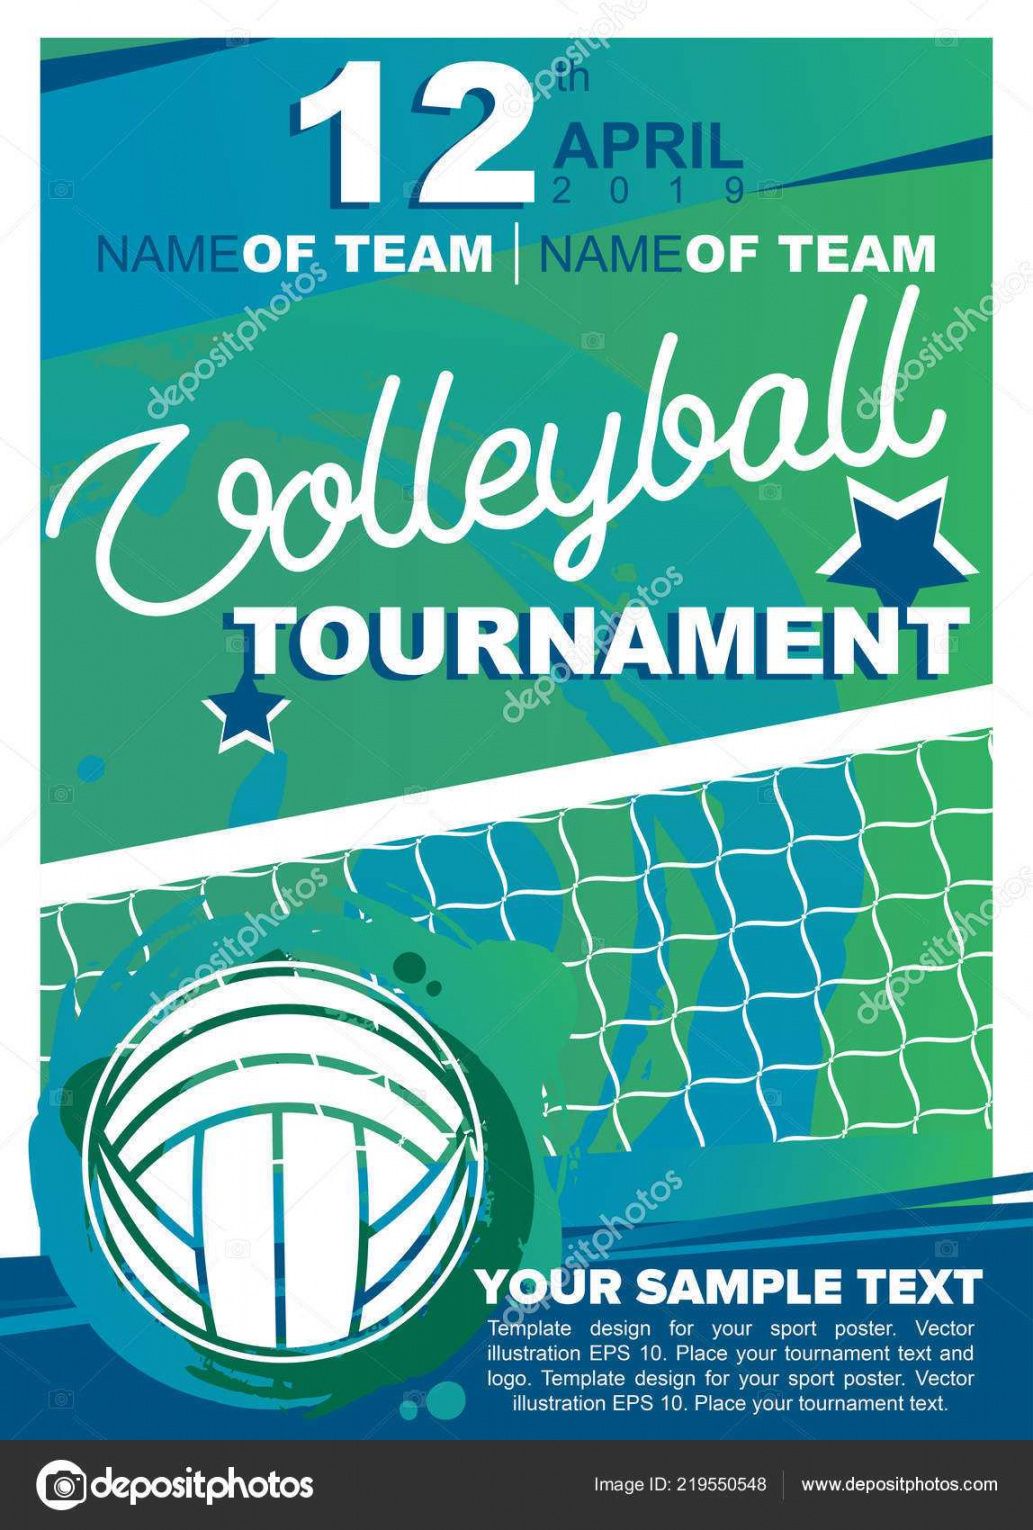 99 visiting volleyball tournament flyer template layouts volleyball tournament flyer template